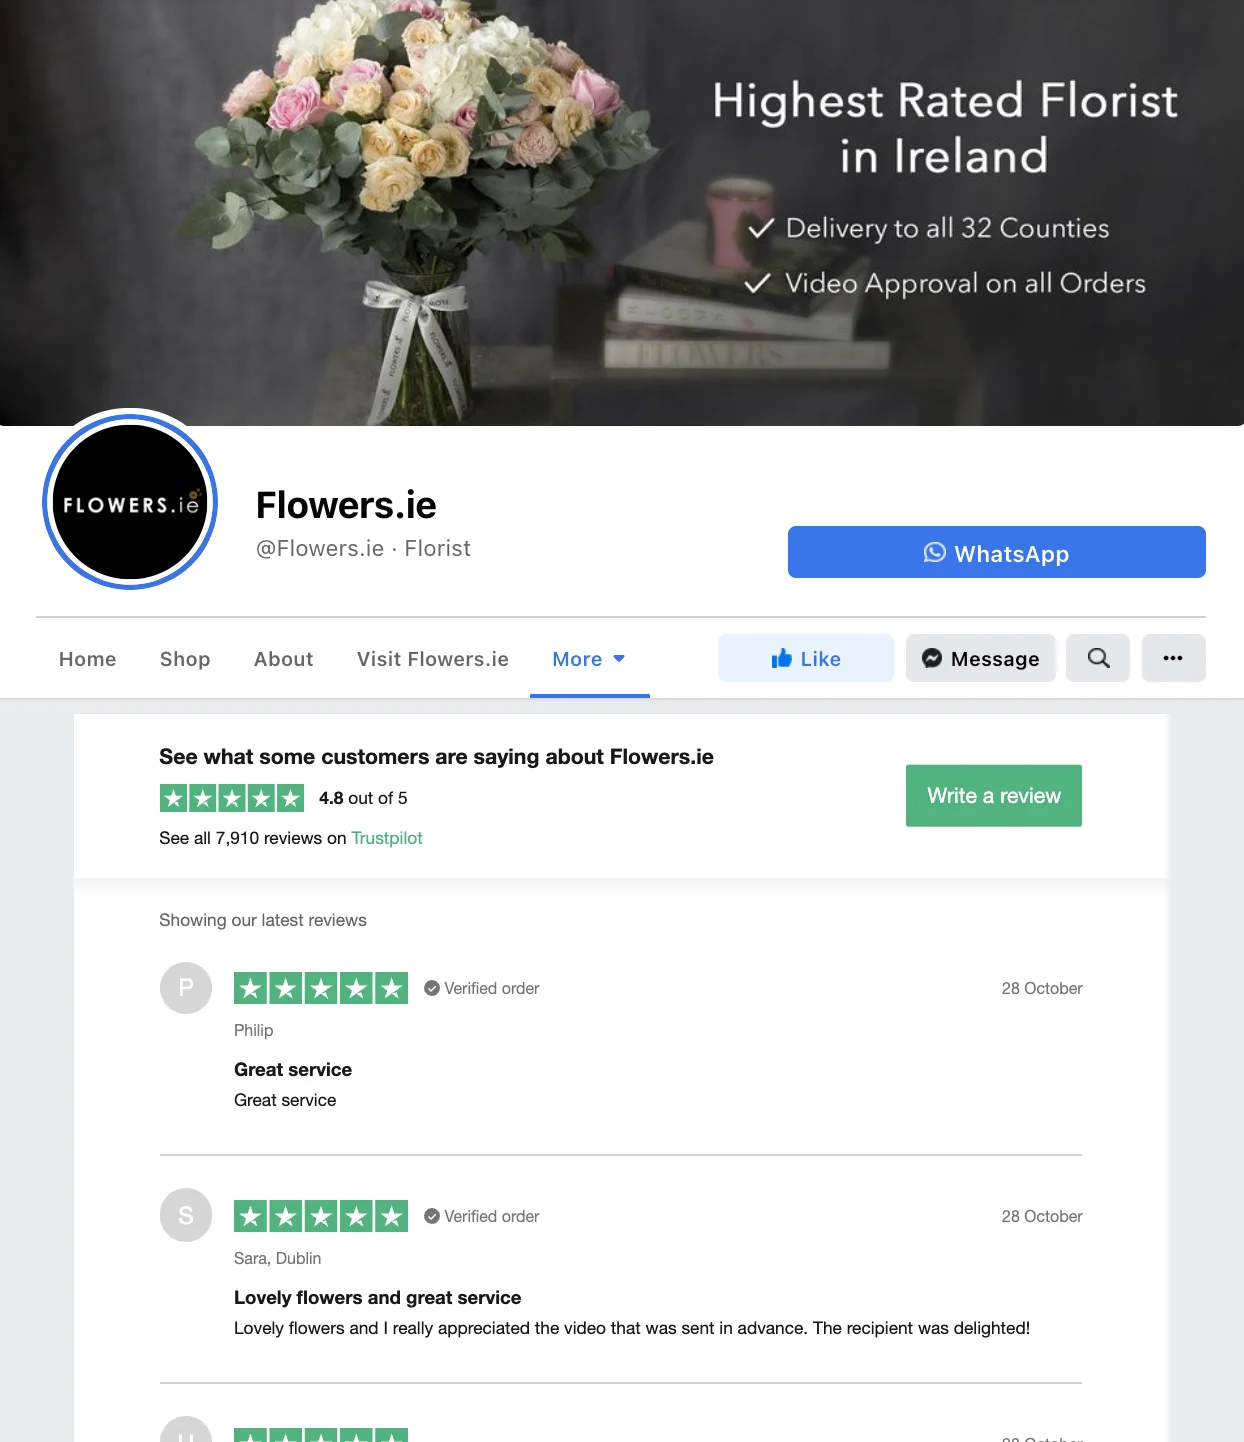 Flowers.ie have embedded Trustpilot reviews on their Facebook Page